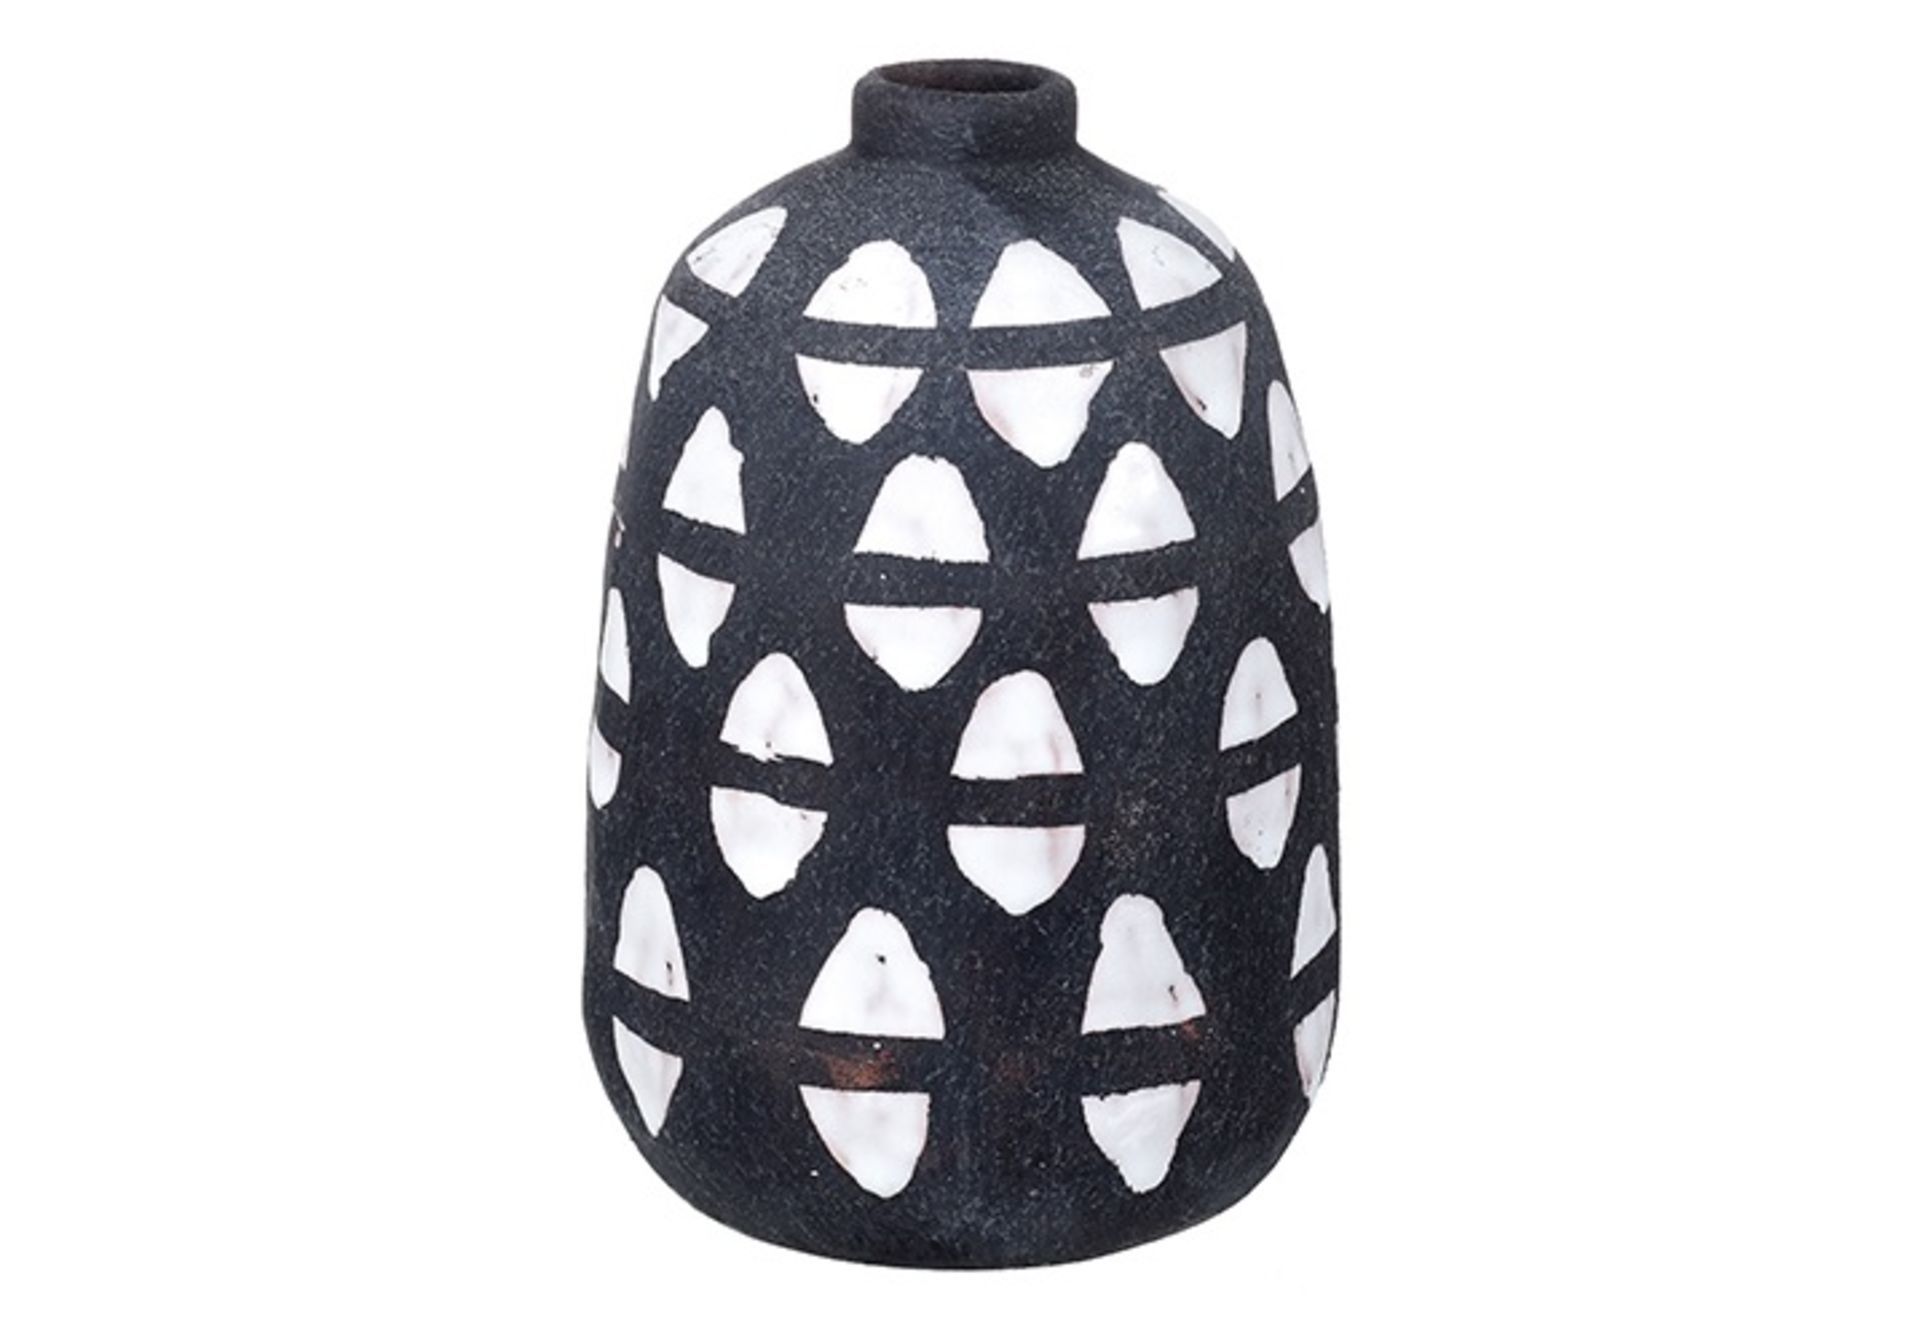 Cassington Vase terracotta in black and white 100x150mmh Brand New Parlane Accessories We take our